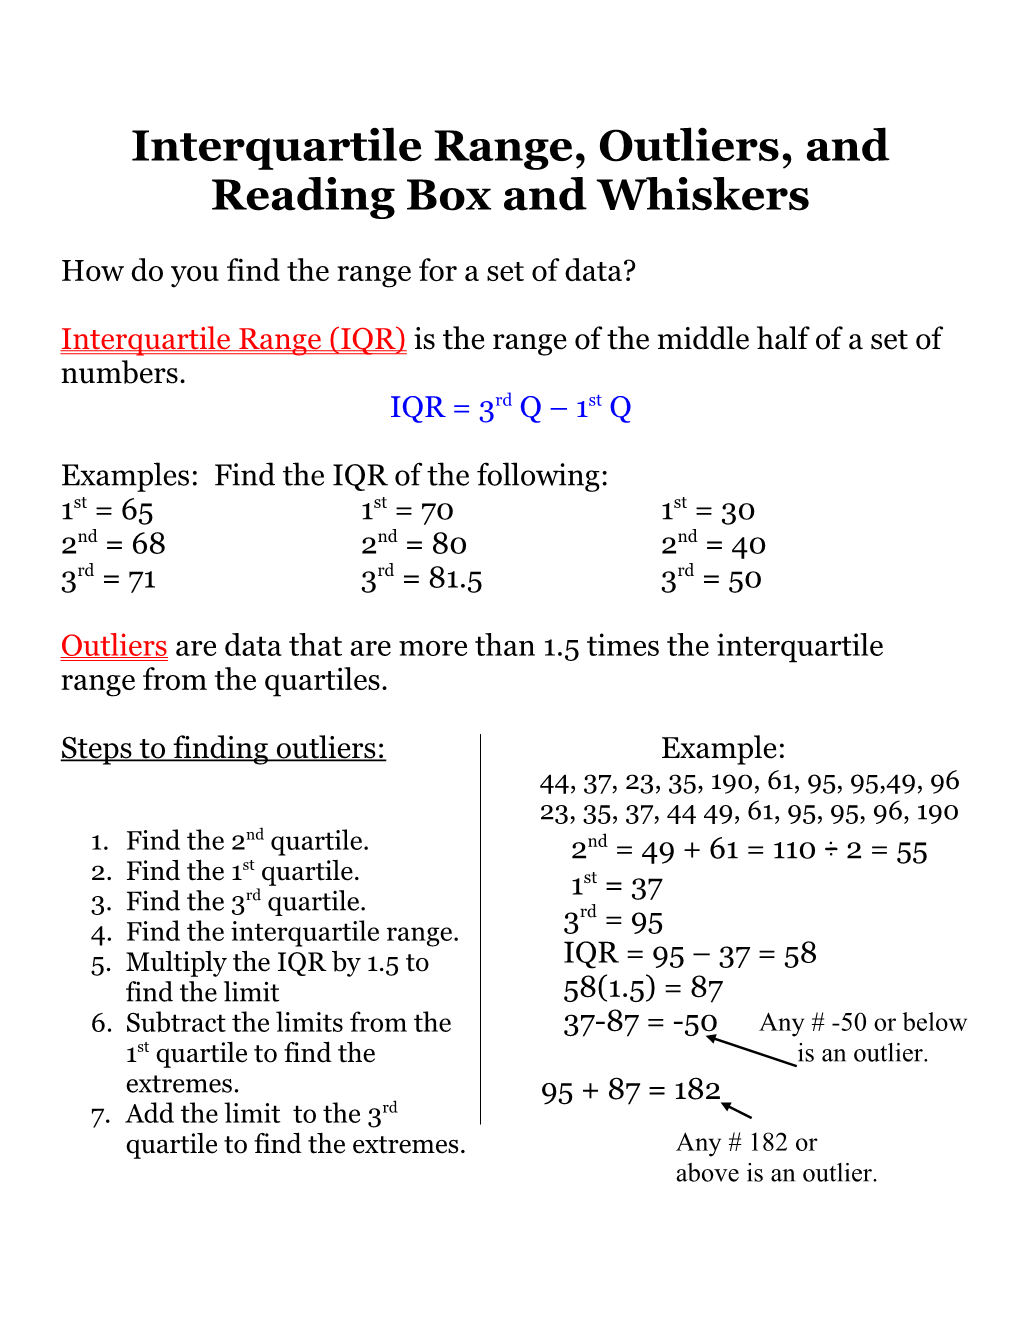 Interquartile Range, Outliers, and Reading Box and Whiskers